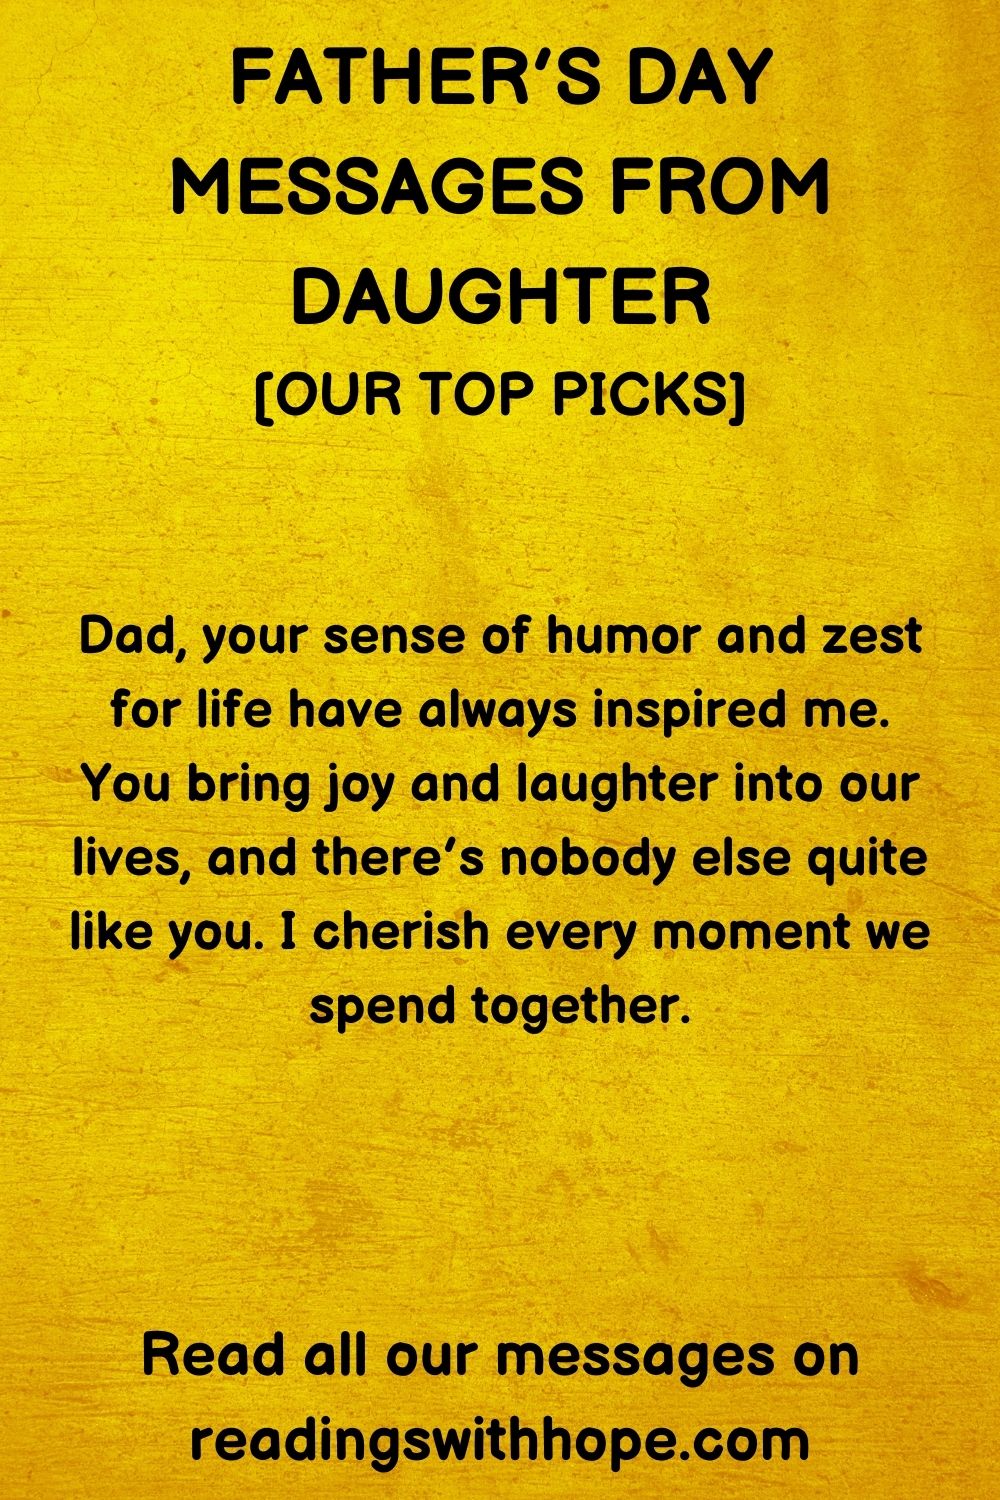 father's day message from daughter